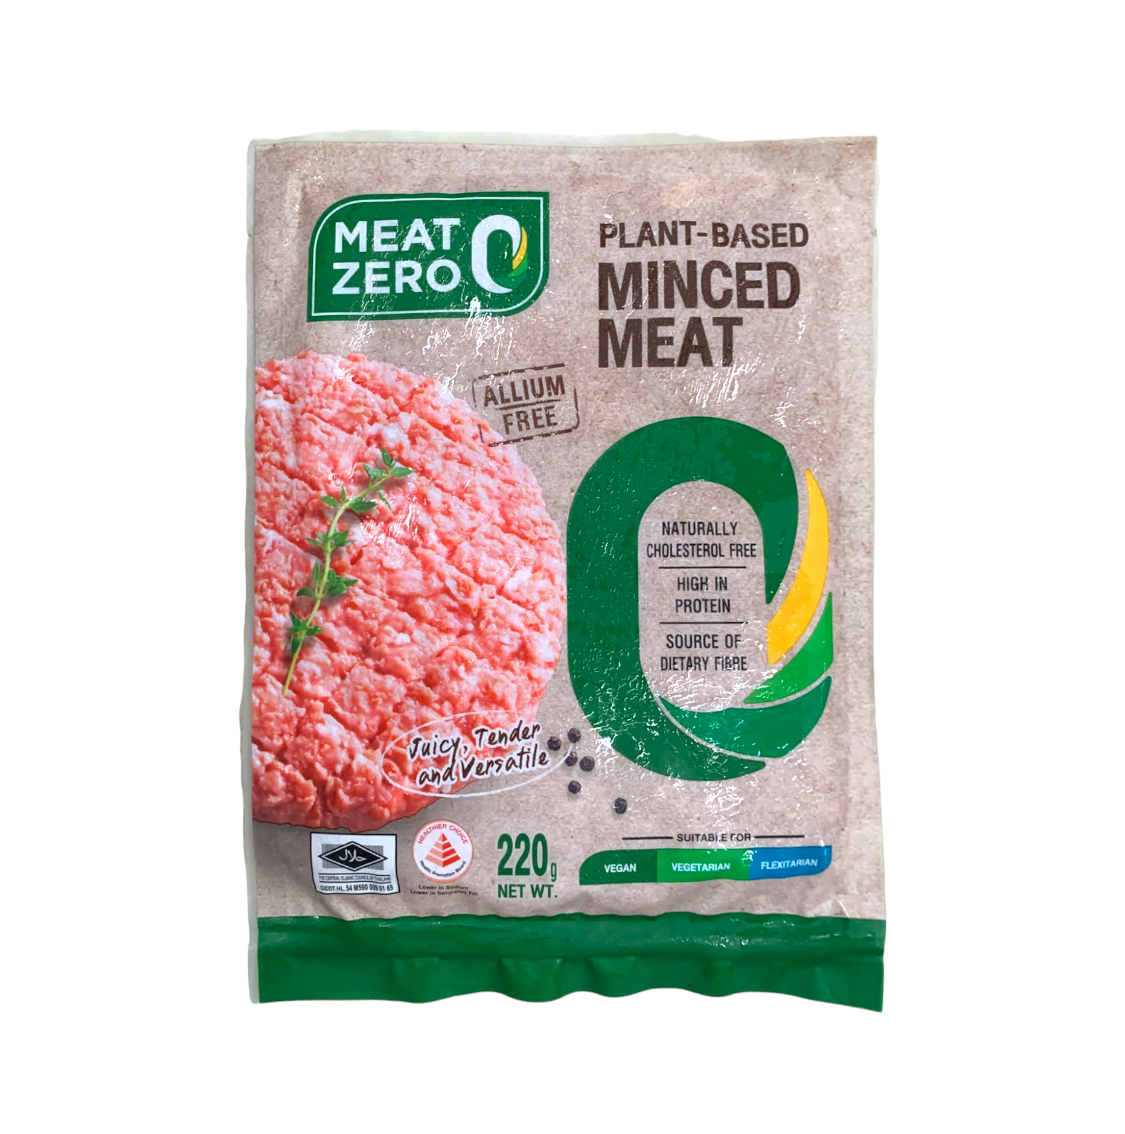 Image Plant-Based Minced Meat Zero Meat no alliums 植物碎肉 220grams -( Promo price till 31 dec 2022 or whilst stocks last)